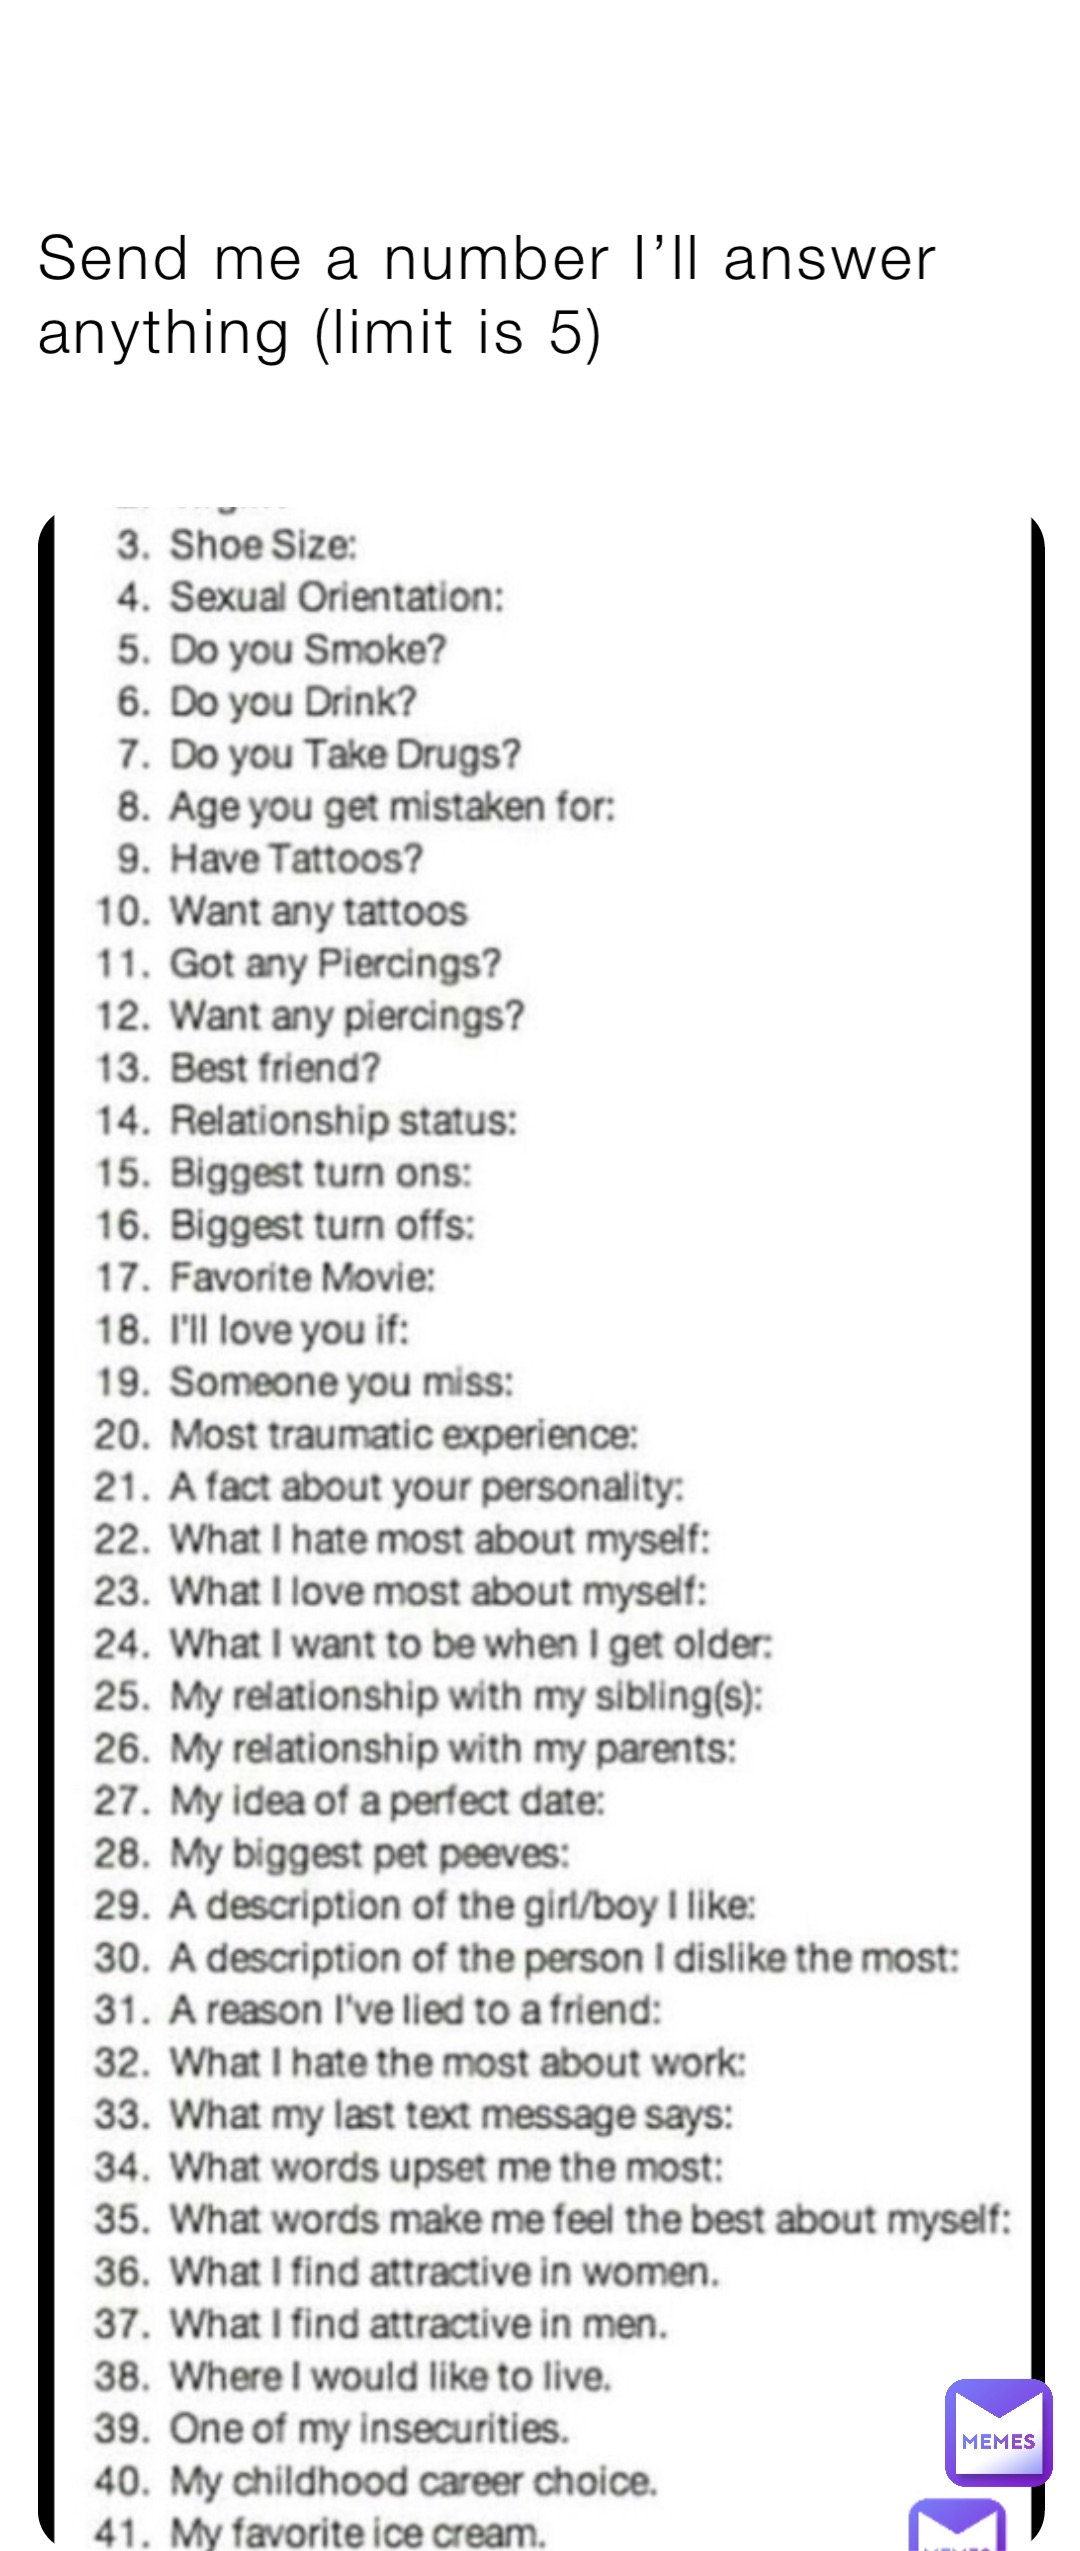 Reposting this from my other account and ill answer some